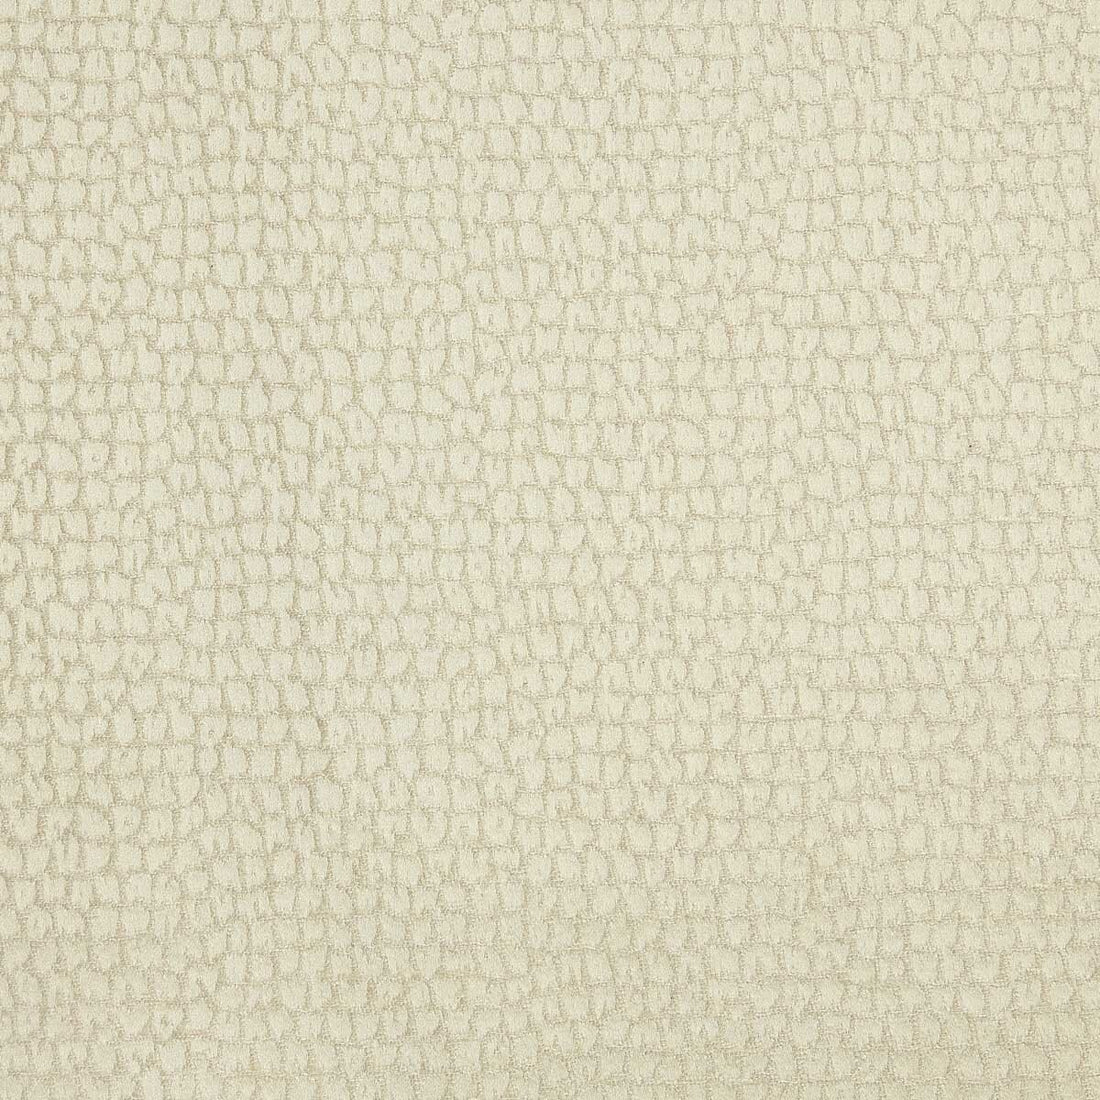 Gaudi fabric in 7 color - pattern LZ-30410.07.0 - by Kravet Couture in the Lizzo collection